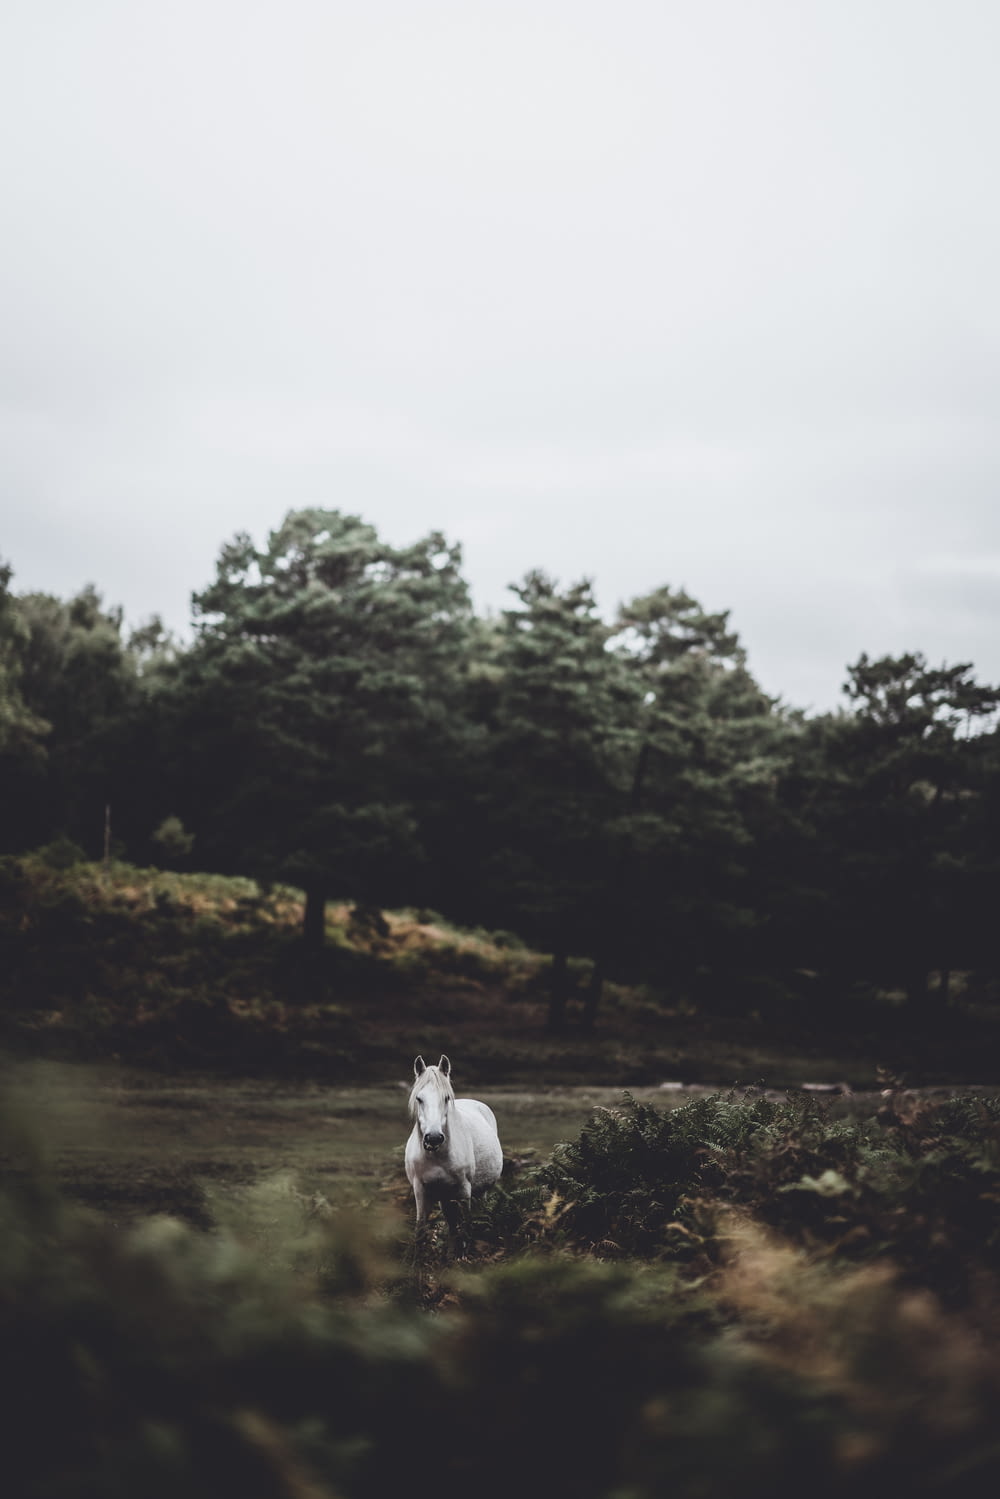 shallow focus photo of gray horse near trees during daytime